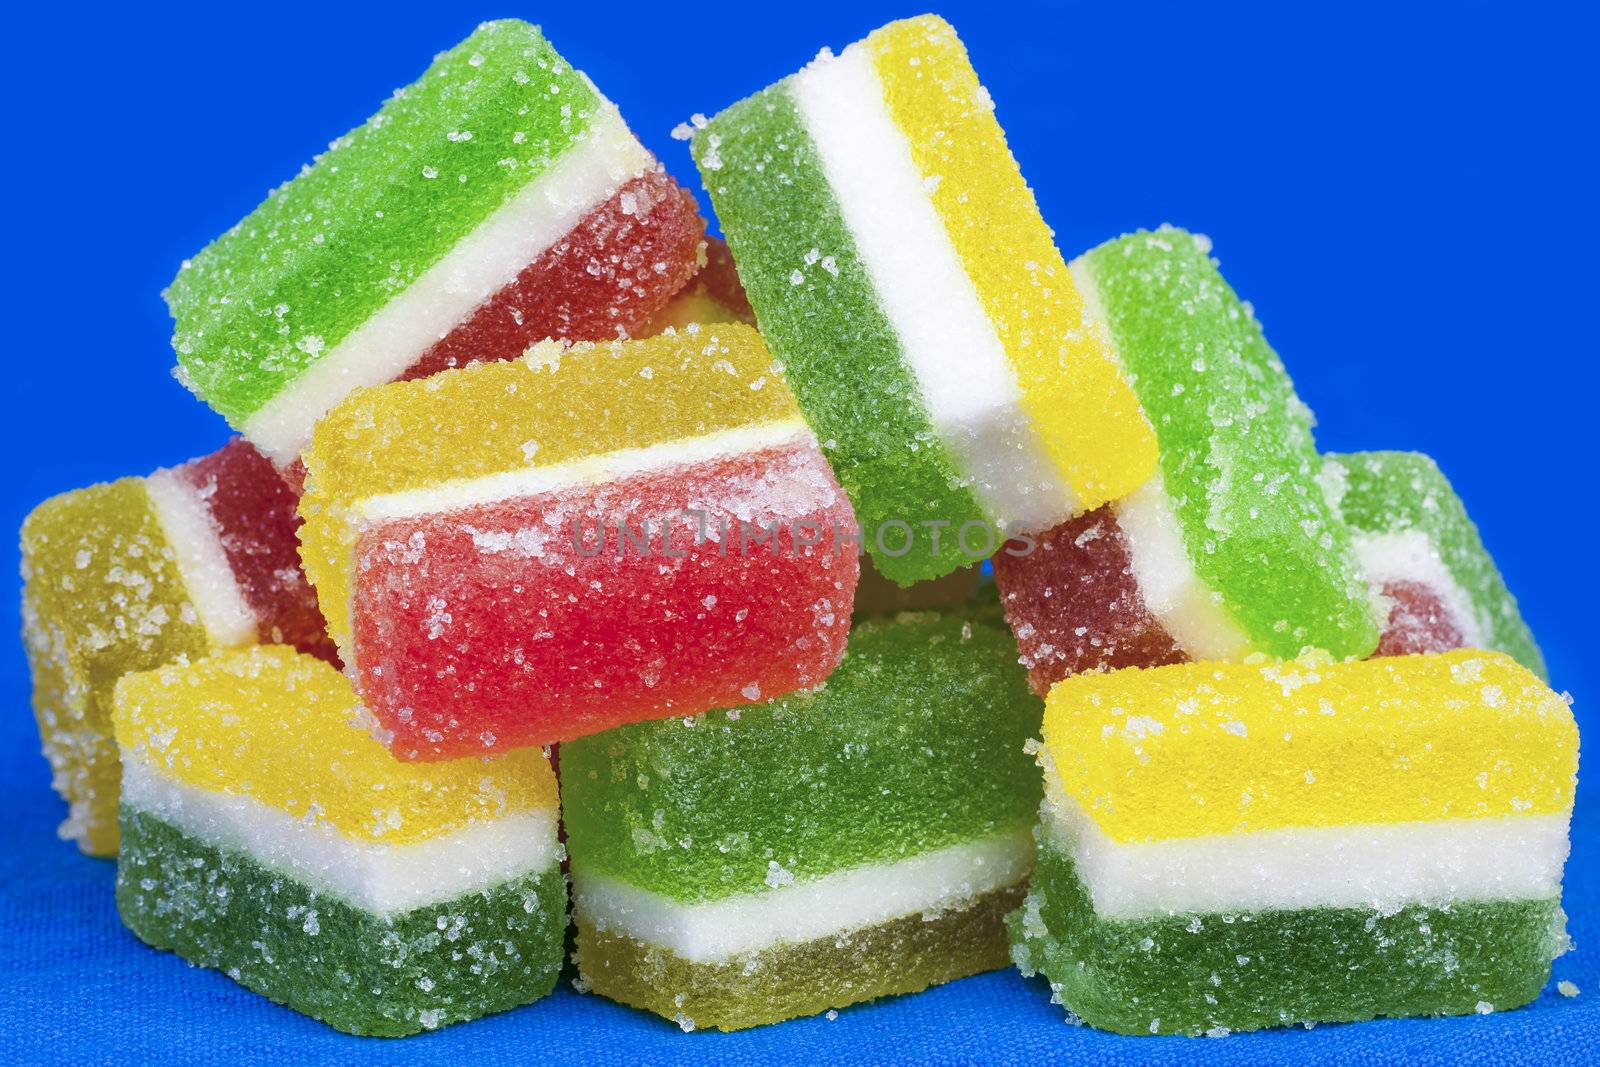 Sweet jelly candies in different colors with sugar